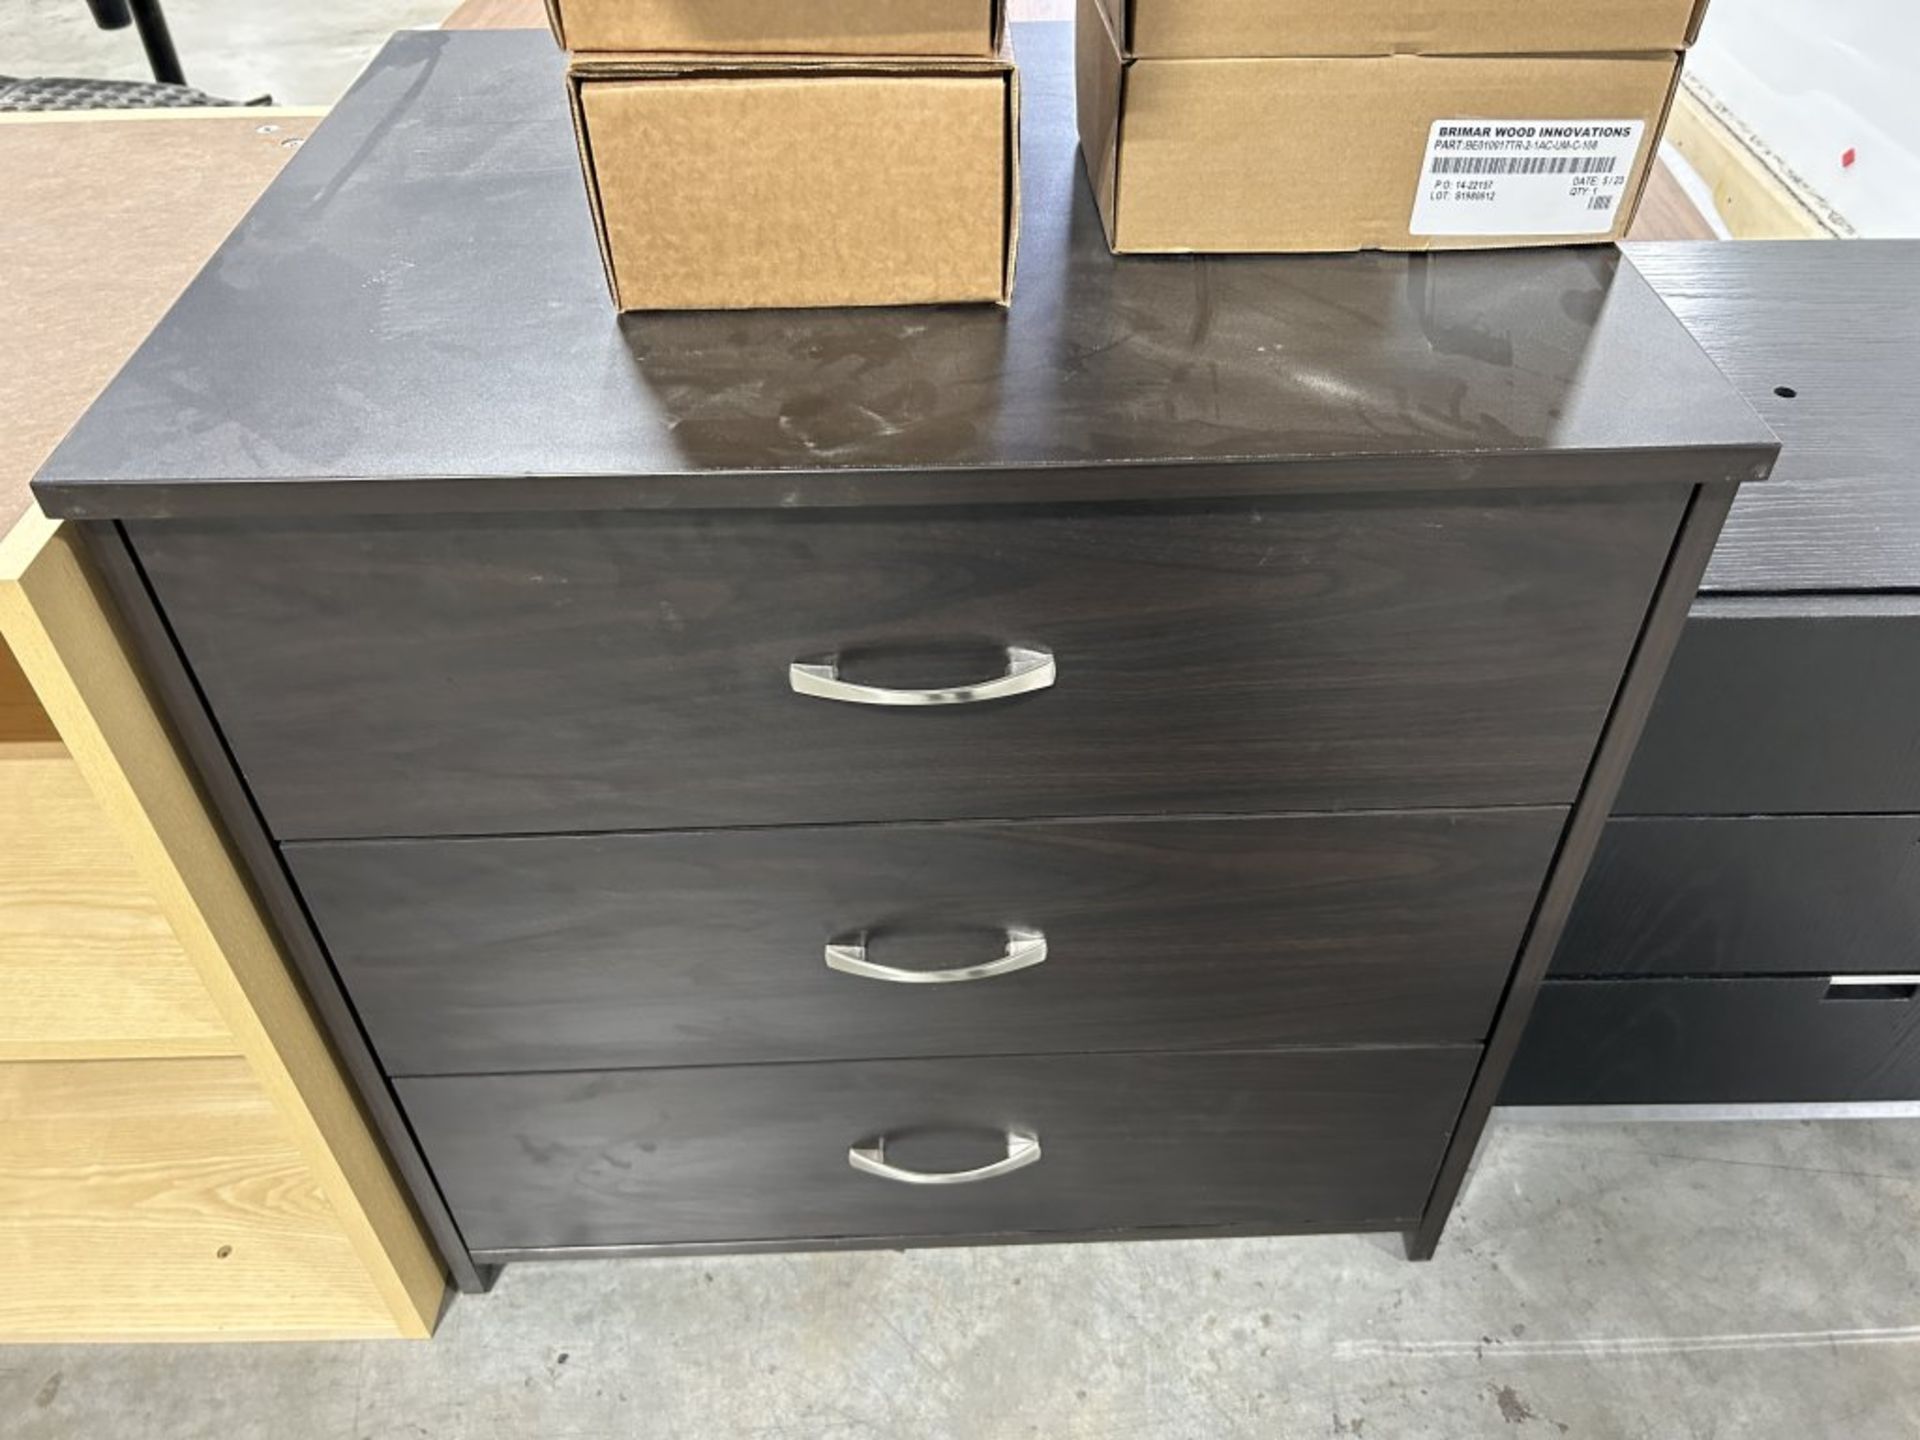 5-DRAWER CABINET 37-1/2" x 18", 3-DRAWER CABINET 30" X 23-3/4", SHELF UNIT 32" X 22-3/4" AND (5) NEW - Image 4 of 10